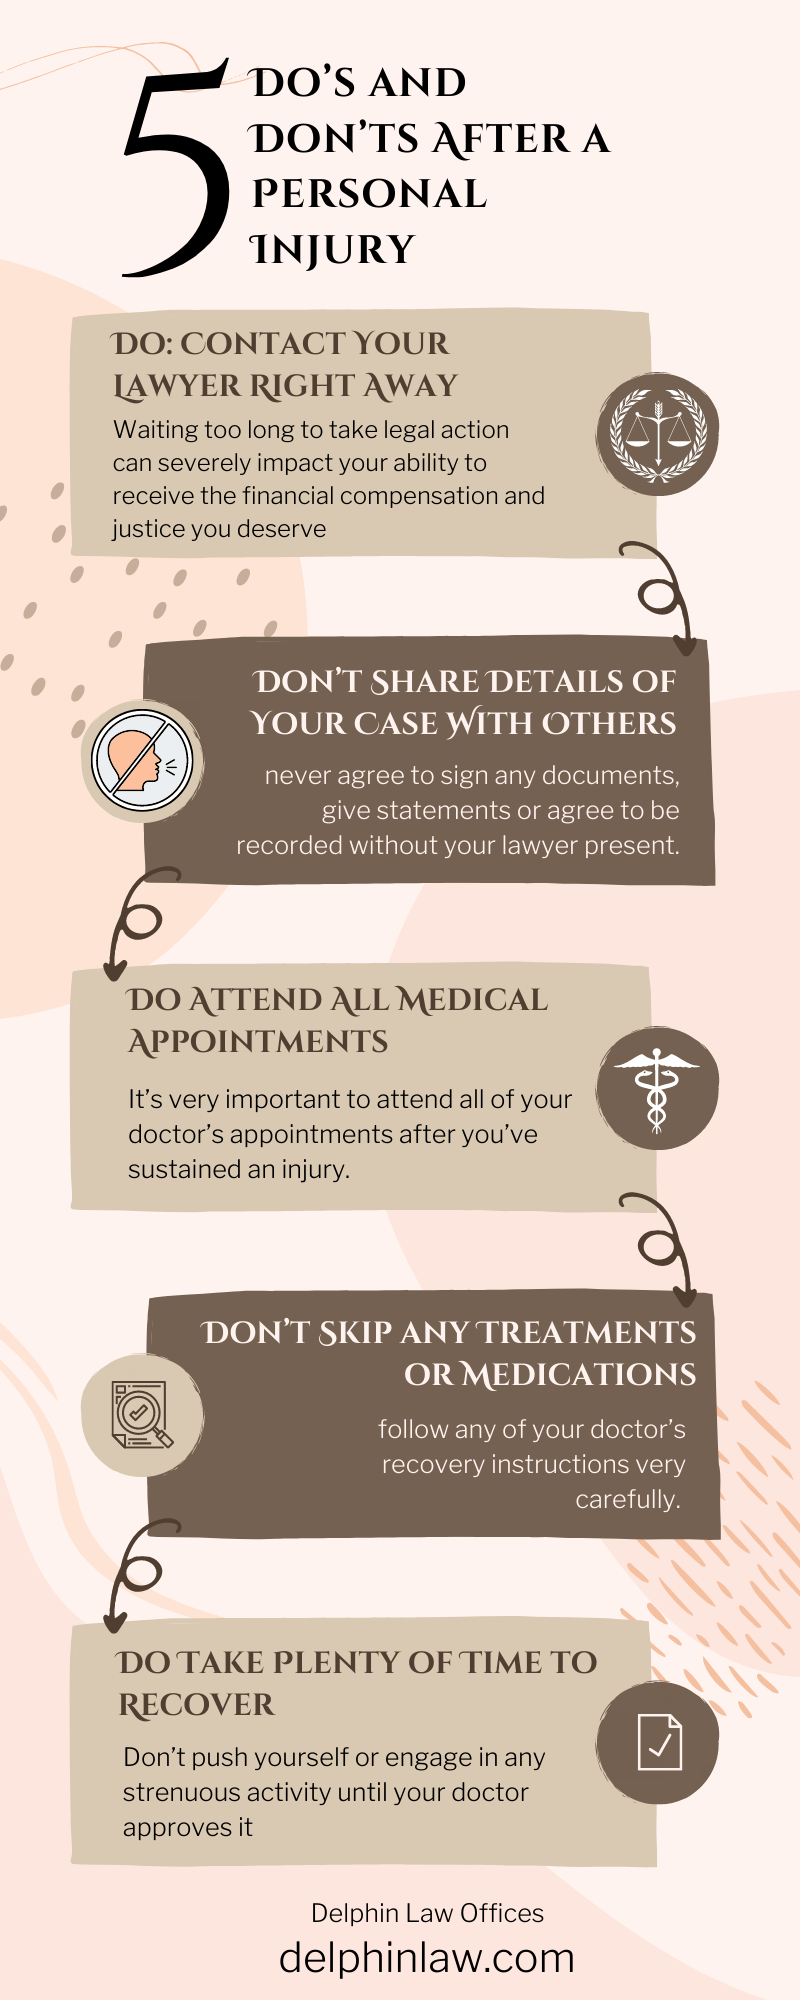 Do’s and Don’ts After a Personal Injury Infographic